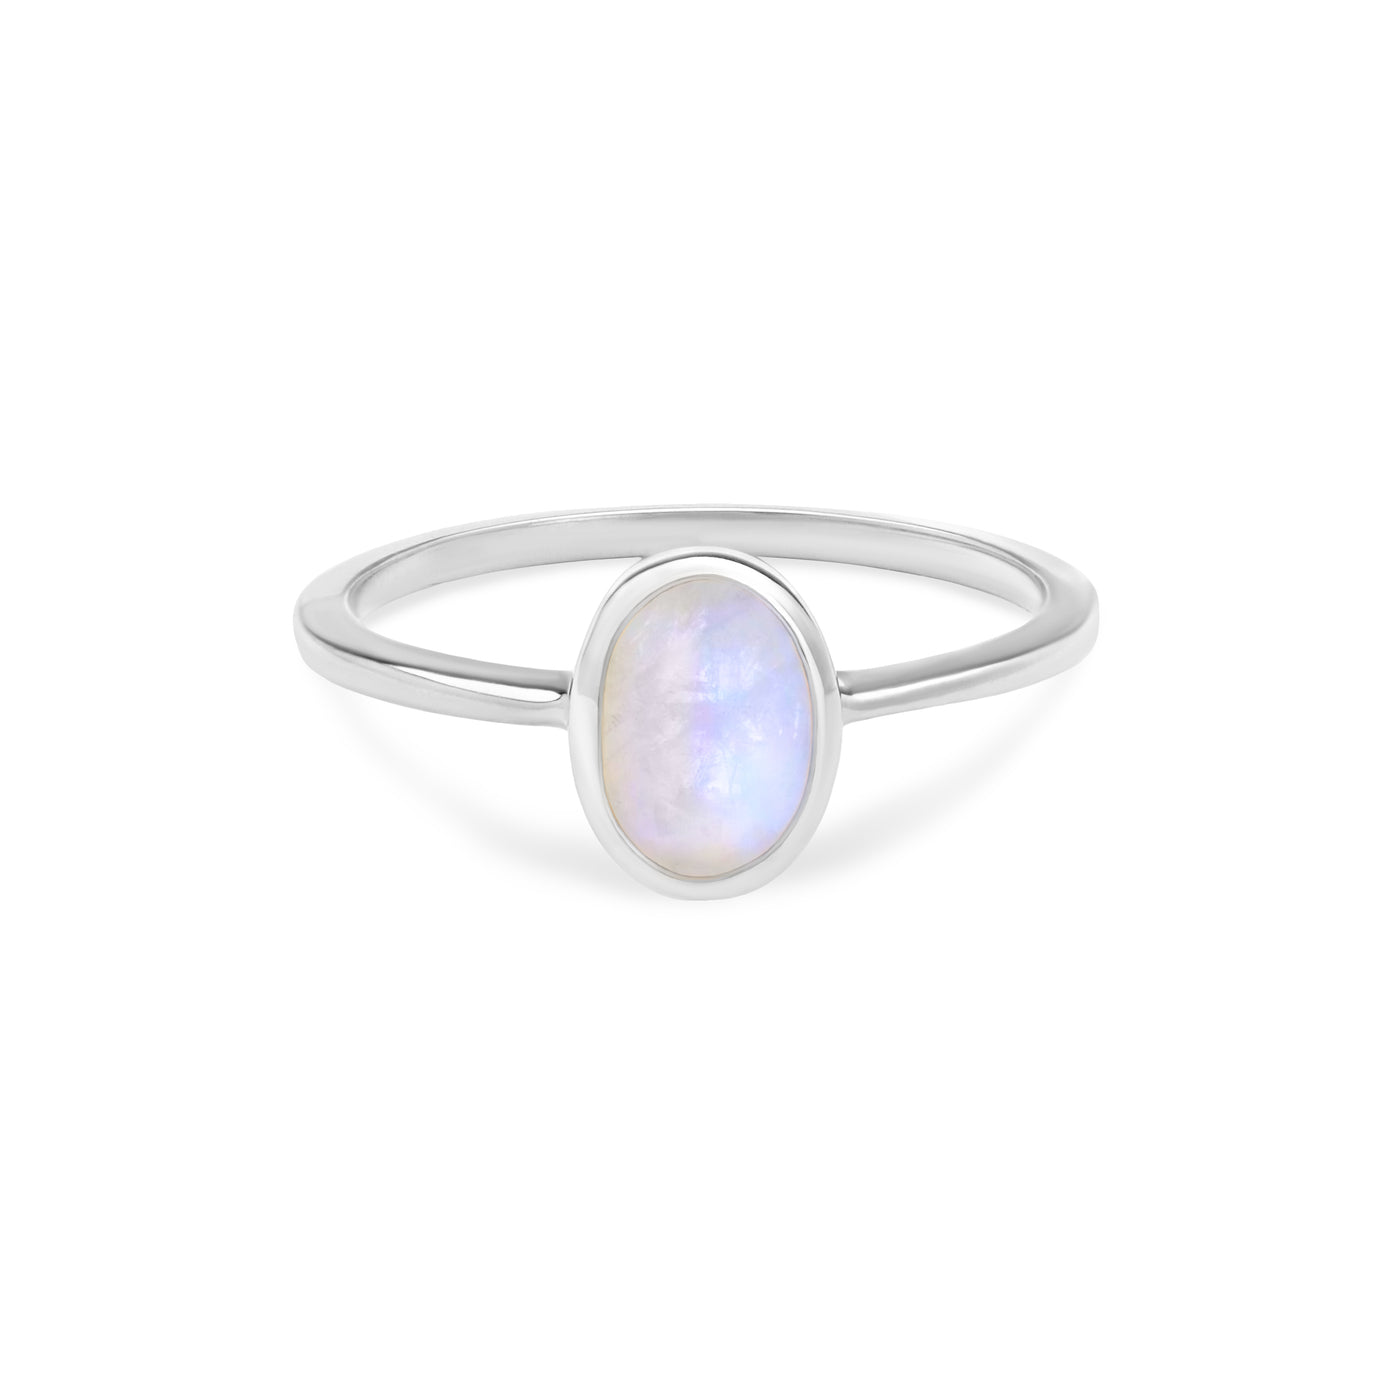 14 Karat White Gold Ring with Oval Shaped Moonstone Stone Against White Background